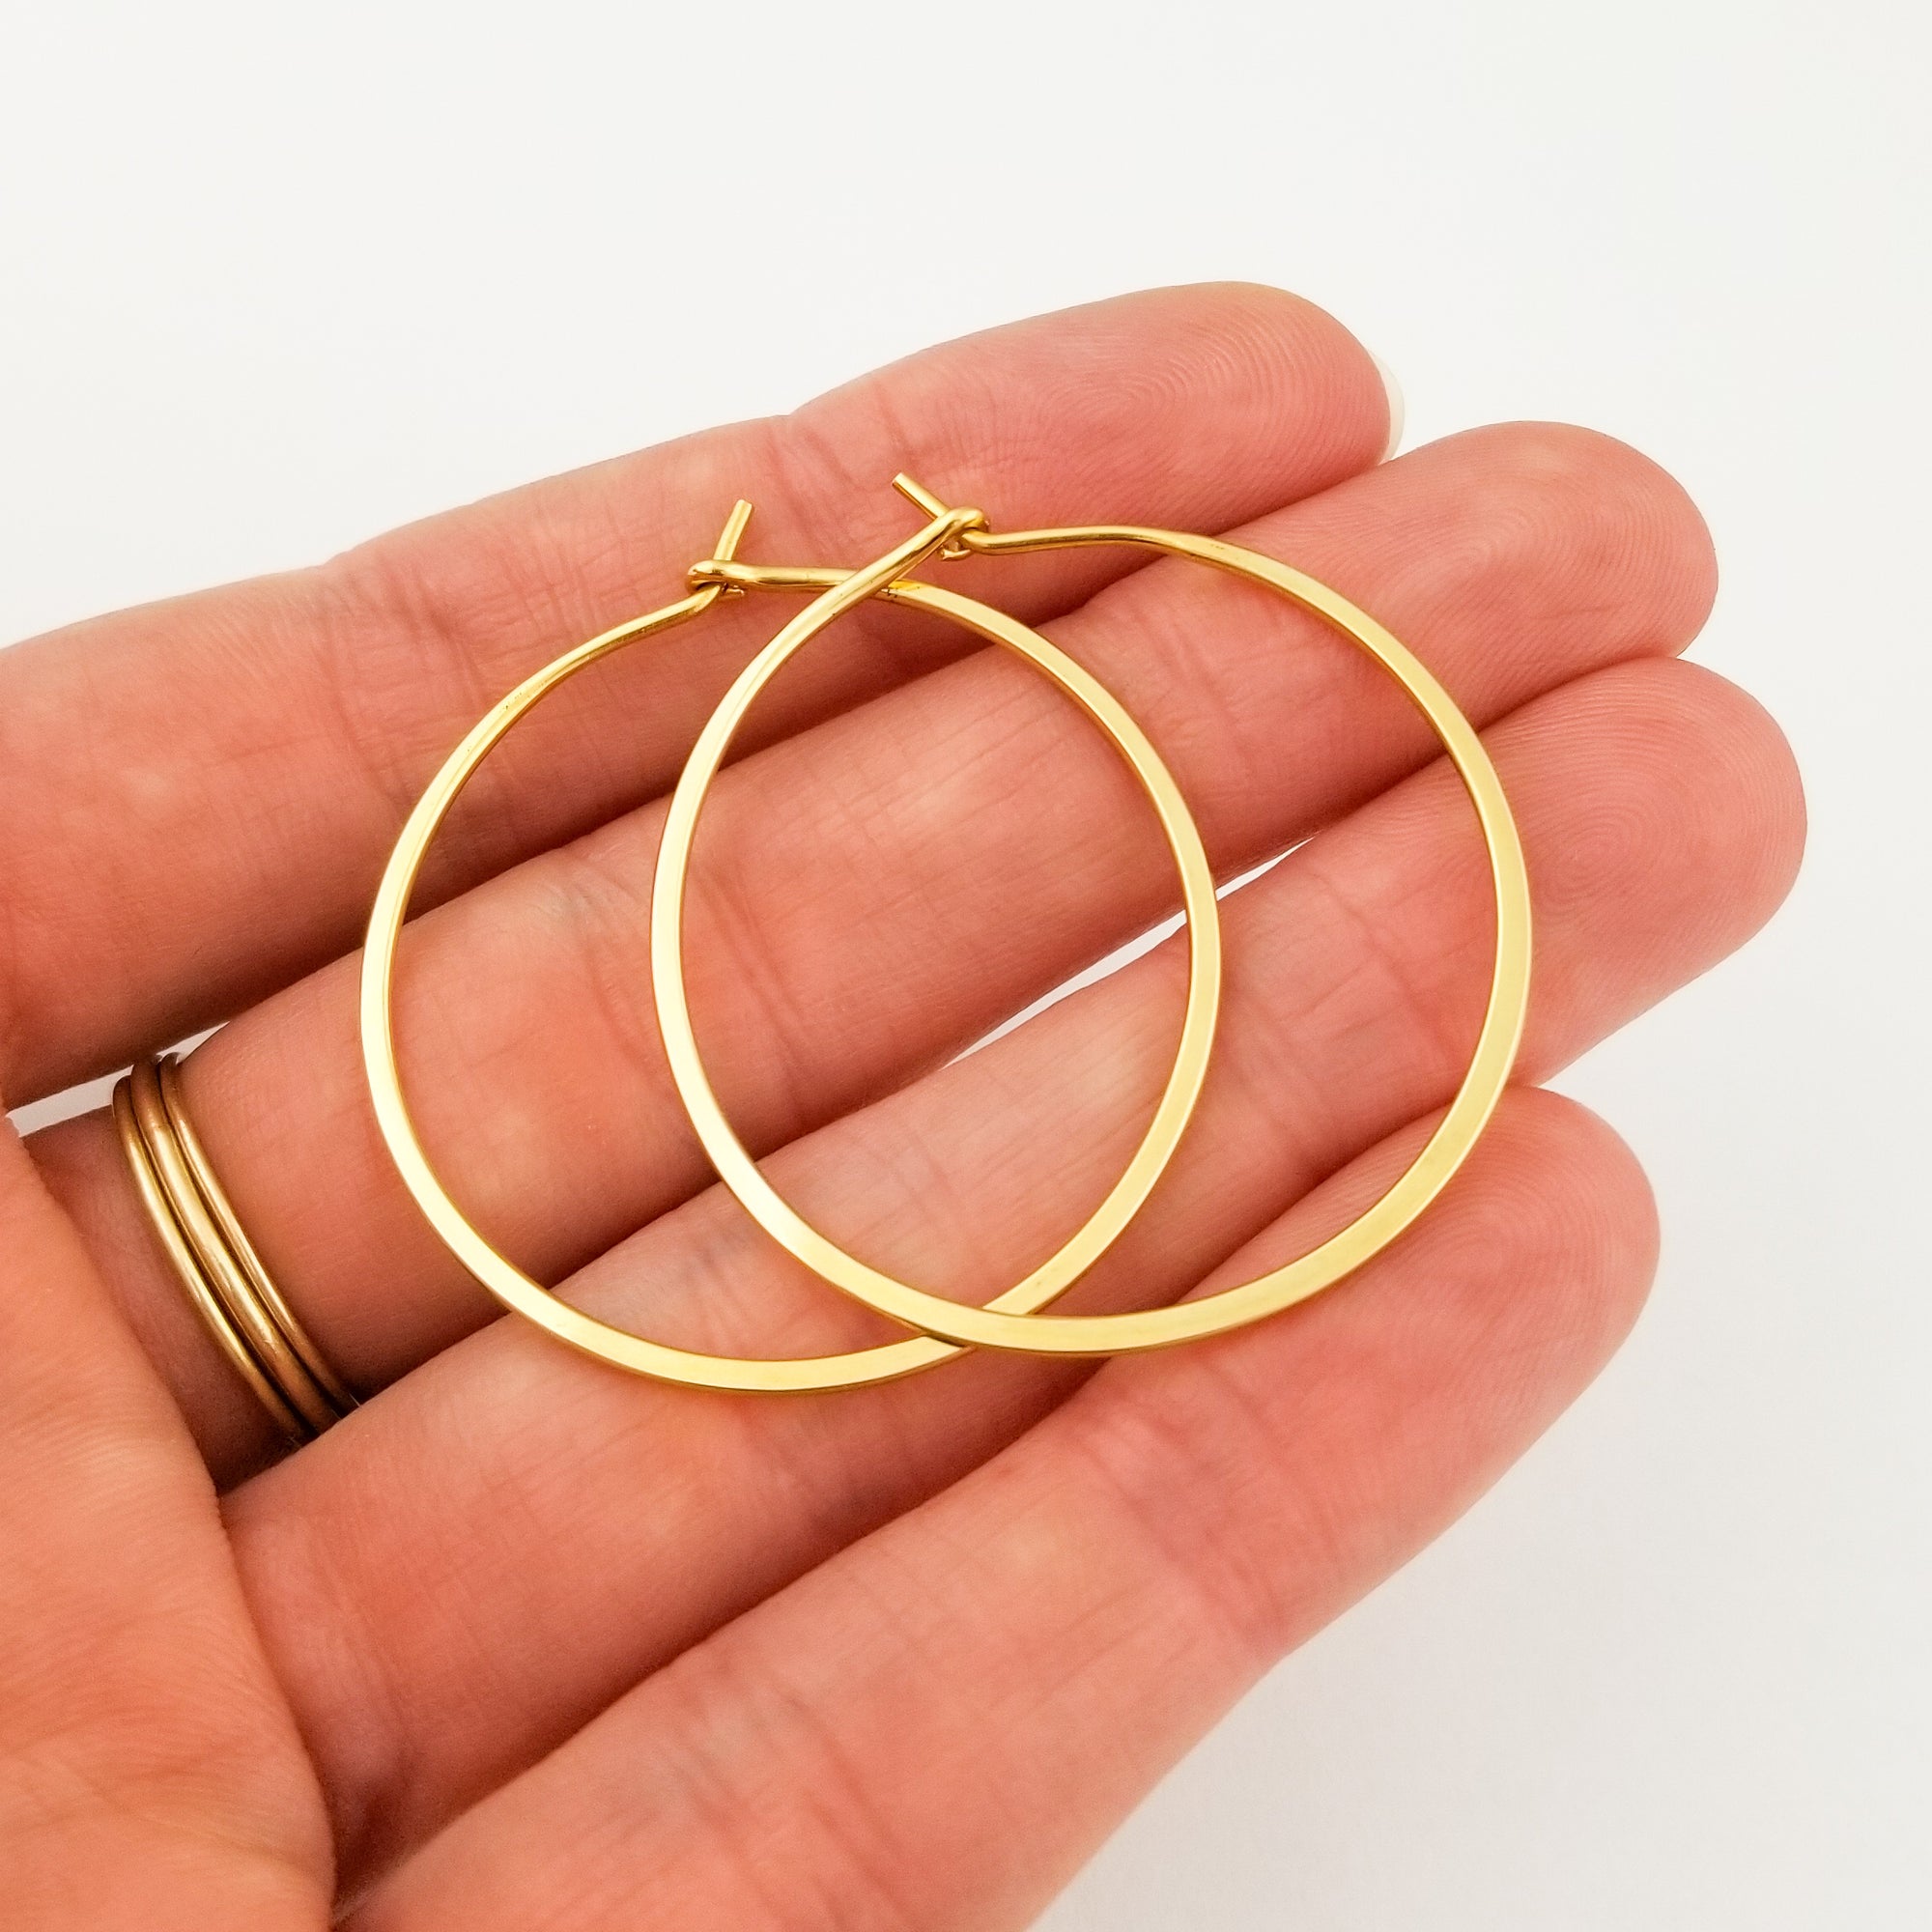 Solid 22 Karat Yellow Gold Flat Hammered Hoop Earrings One and One Half Inch Extra Thick on Black Rock